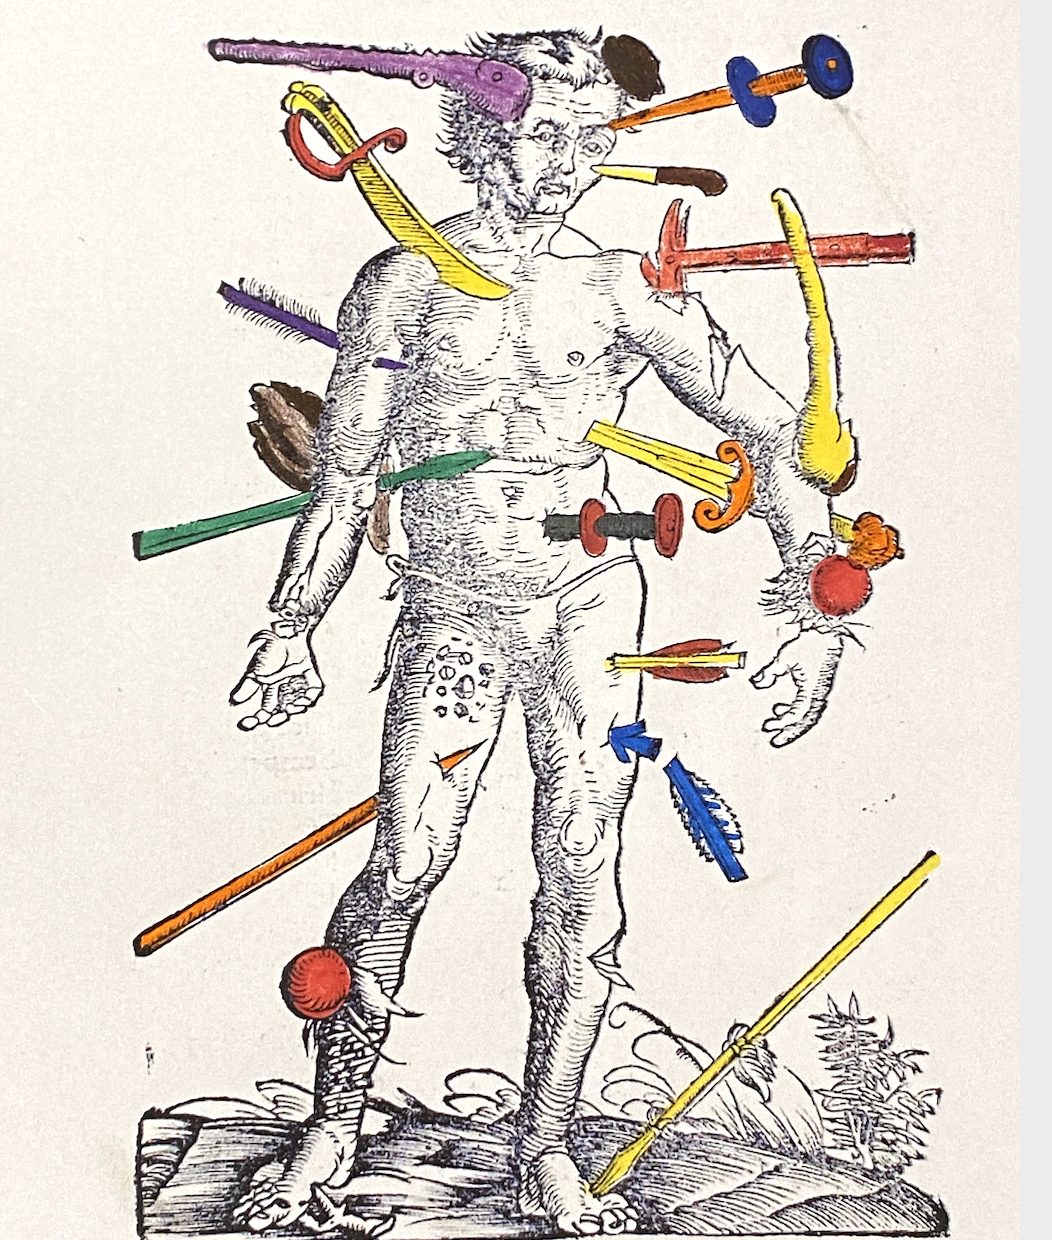 Image of coloring page based on "Wound Man" illustration from Hildegard of Bingen's 1533 work on healing